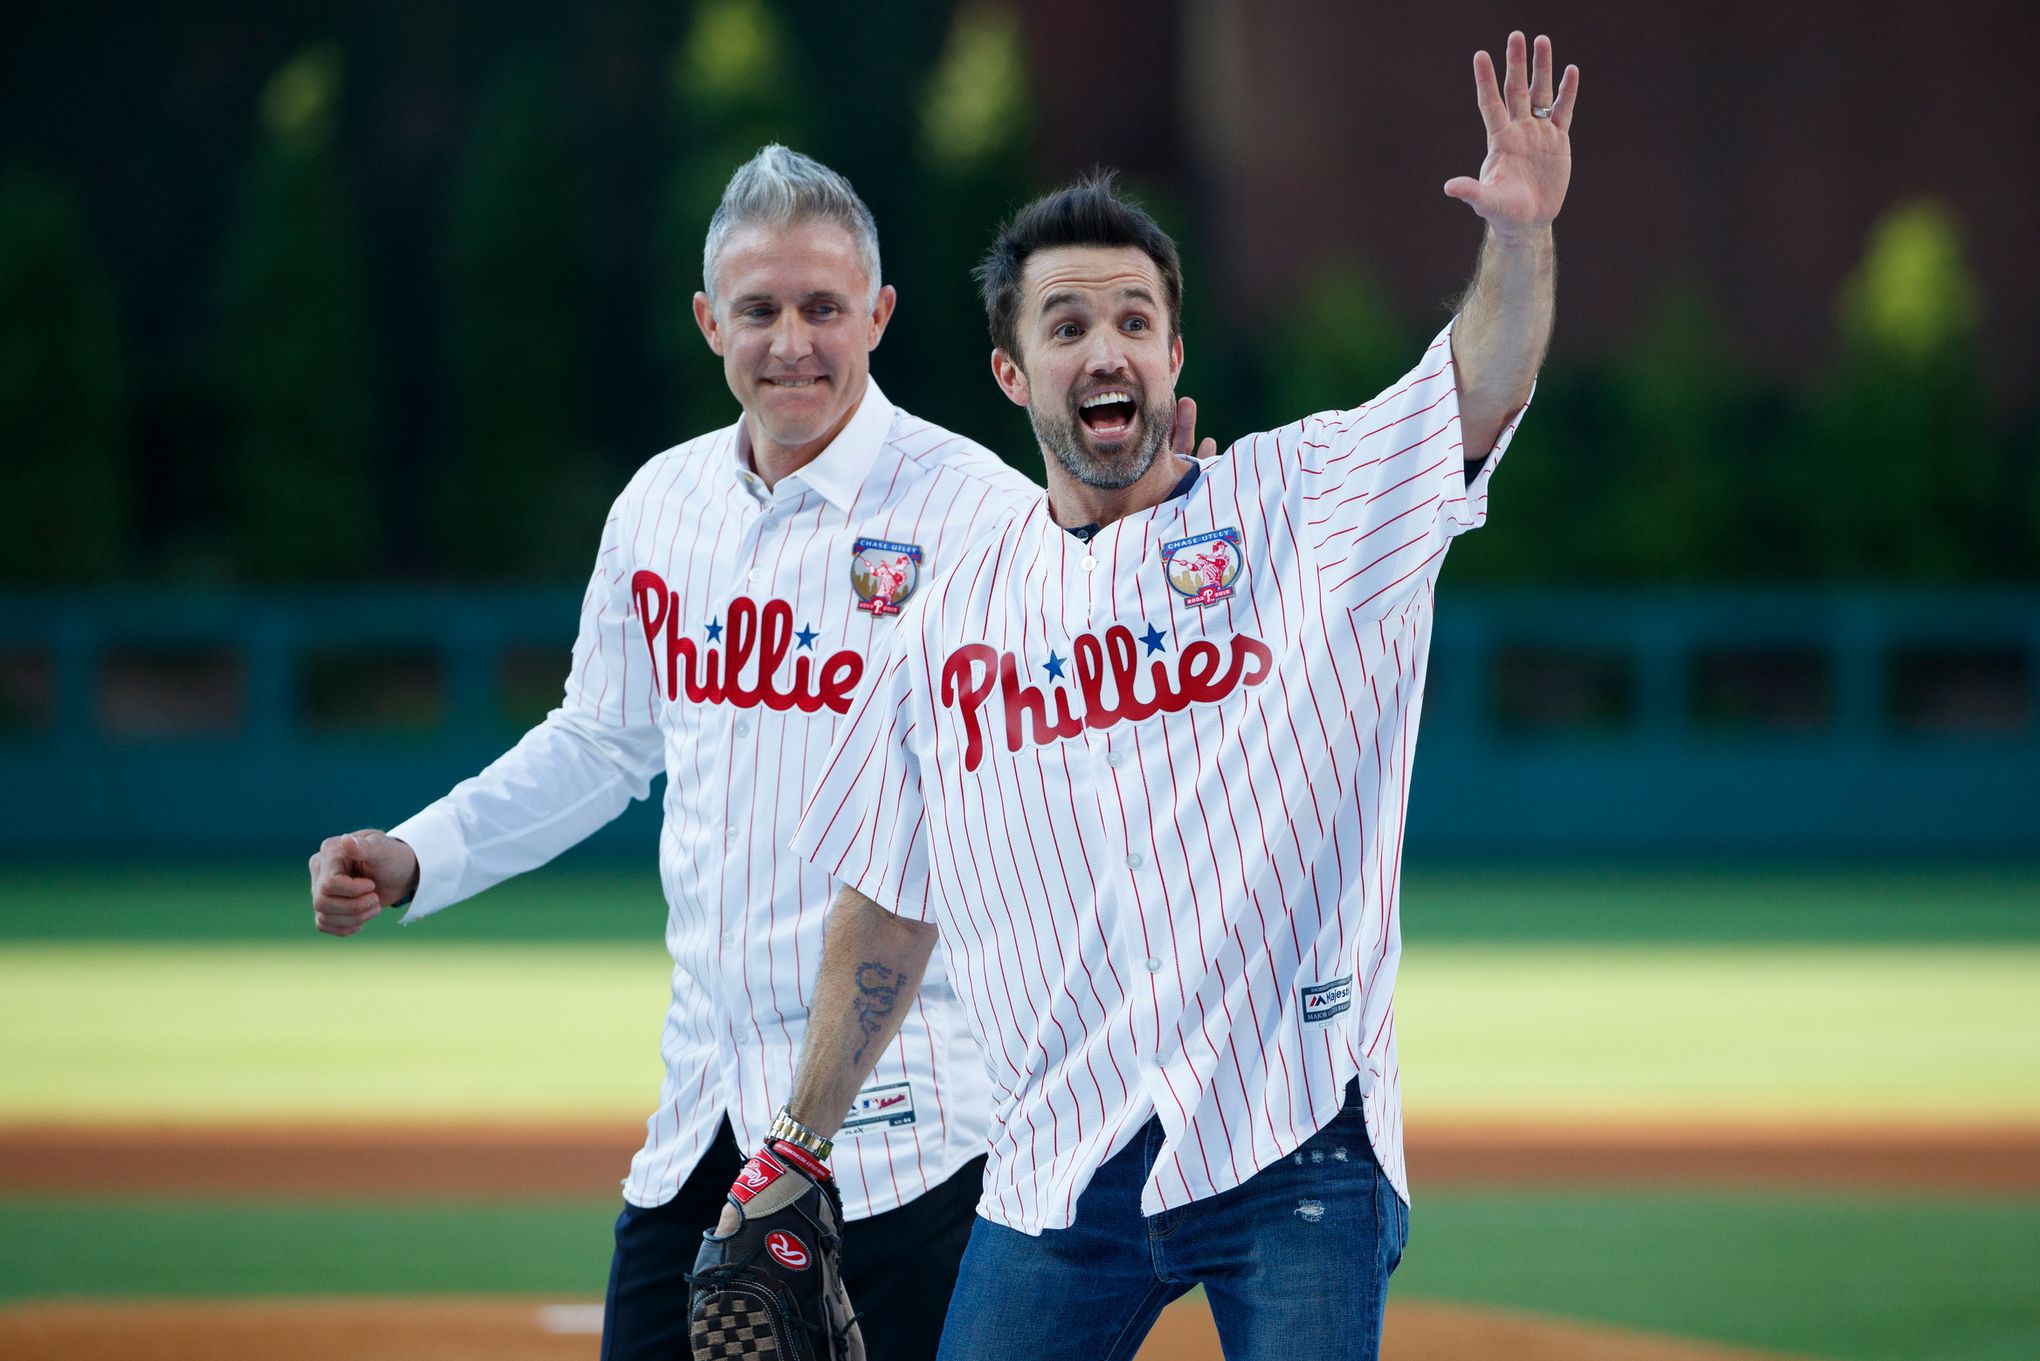 Chase Utley honored, tosses pitch to Always Sunny's Rob McElhenney